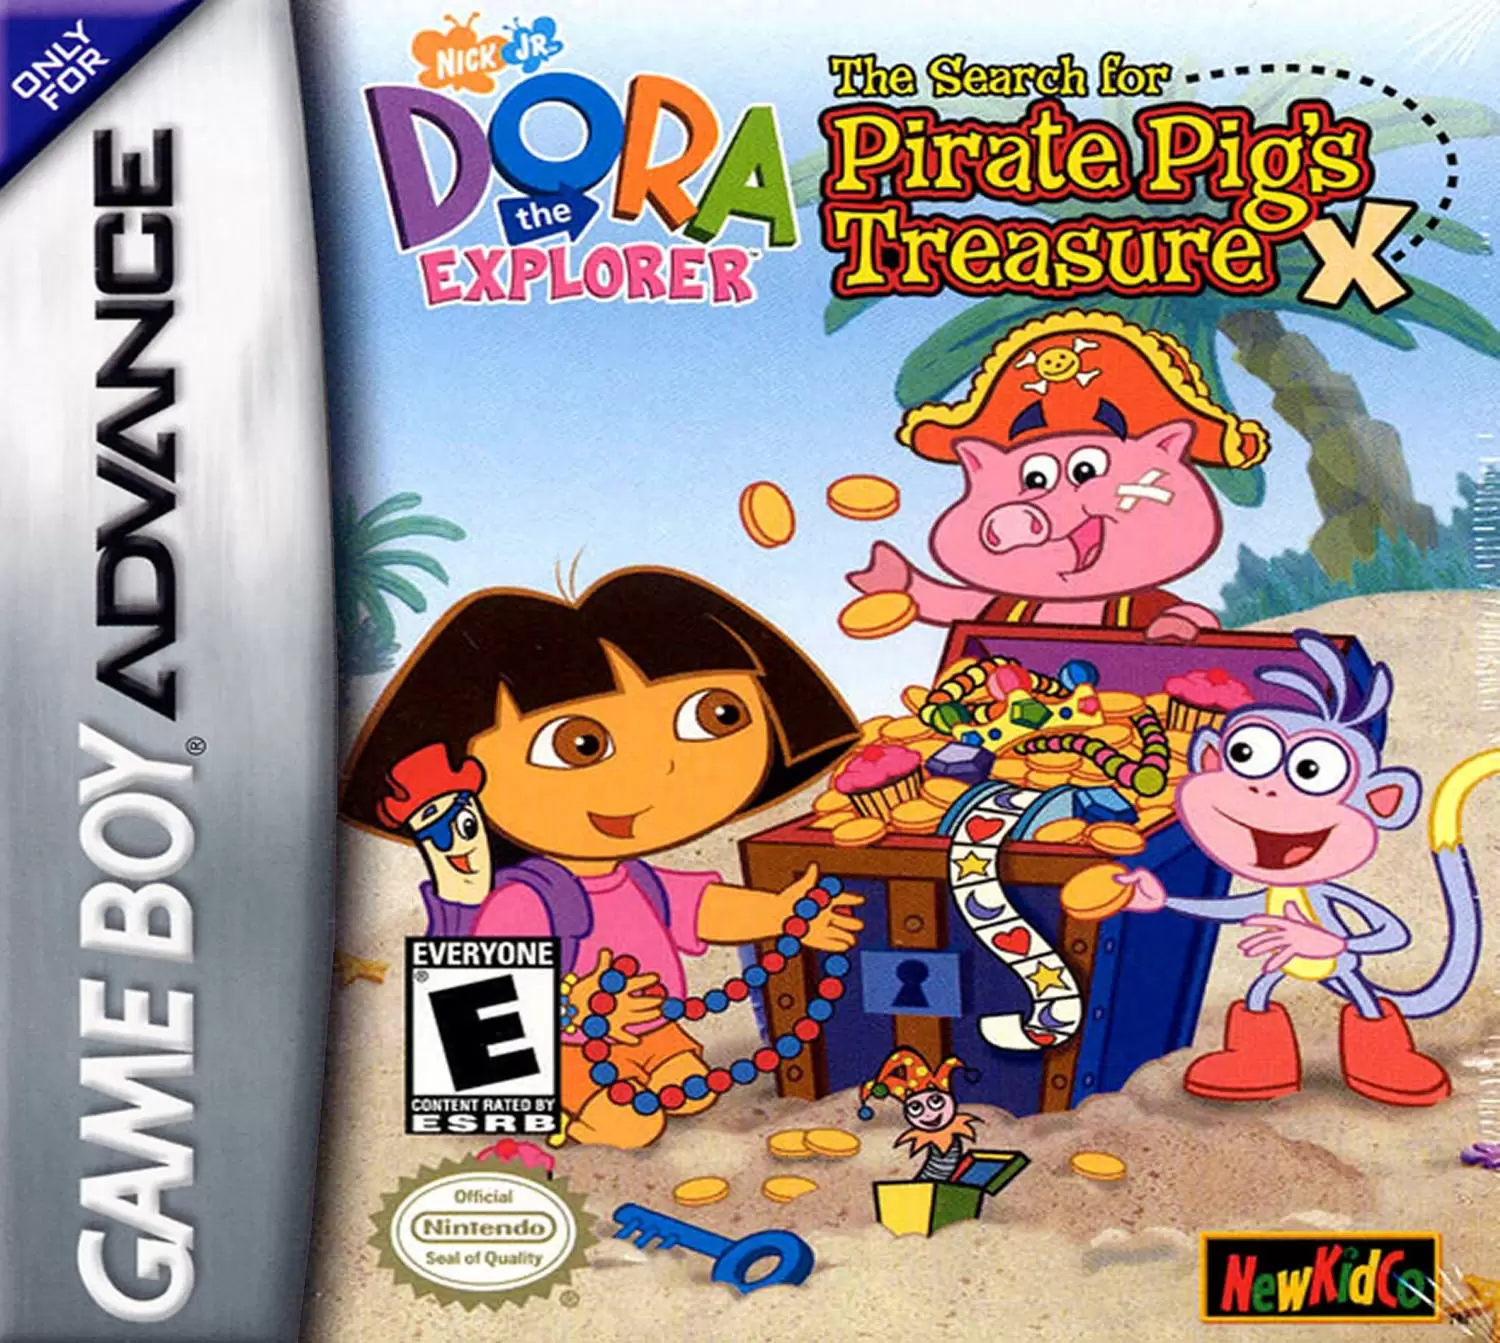 Jeux Game Boy Advance - Dora the Explorer: The Search for Pirate Pig\'s Treasure